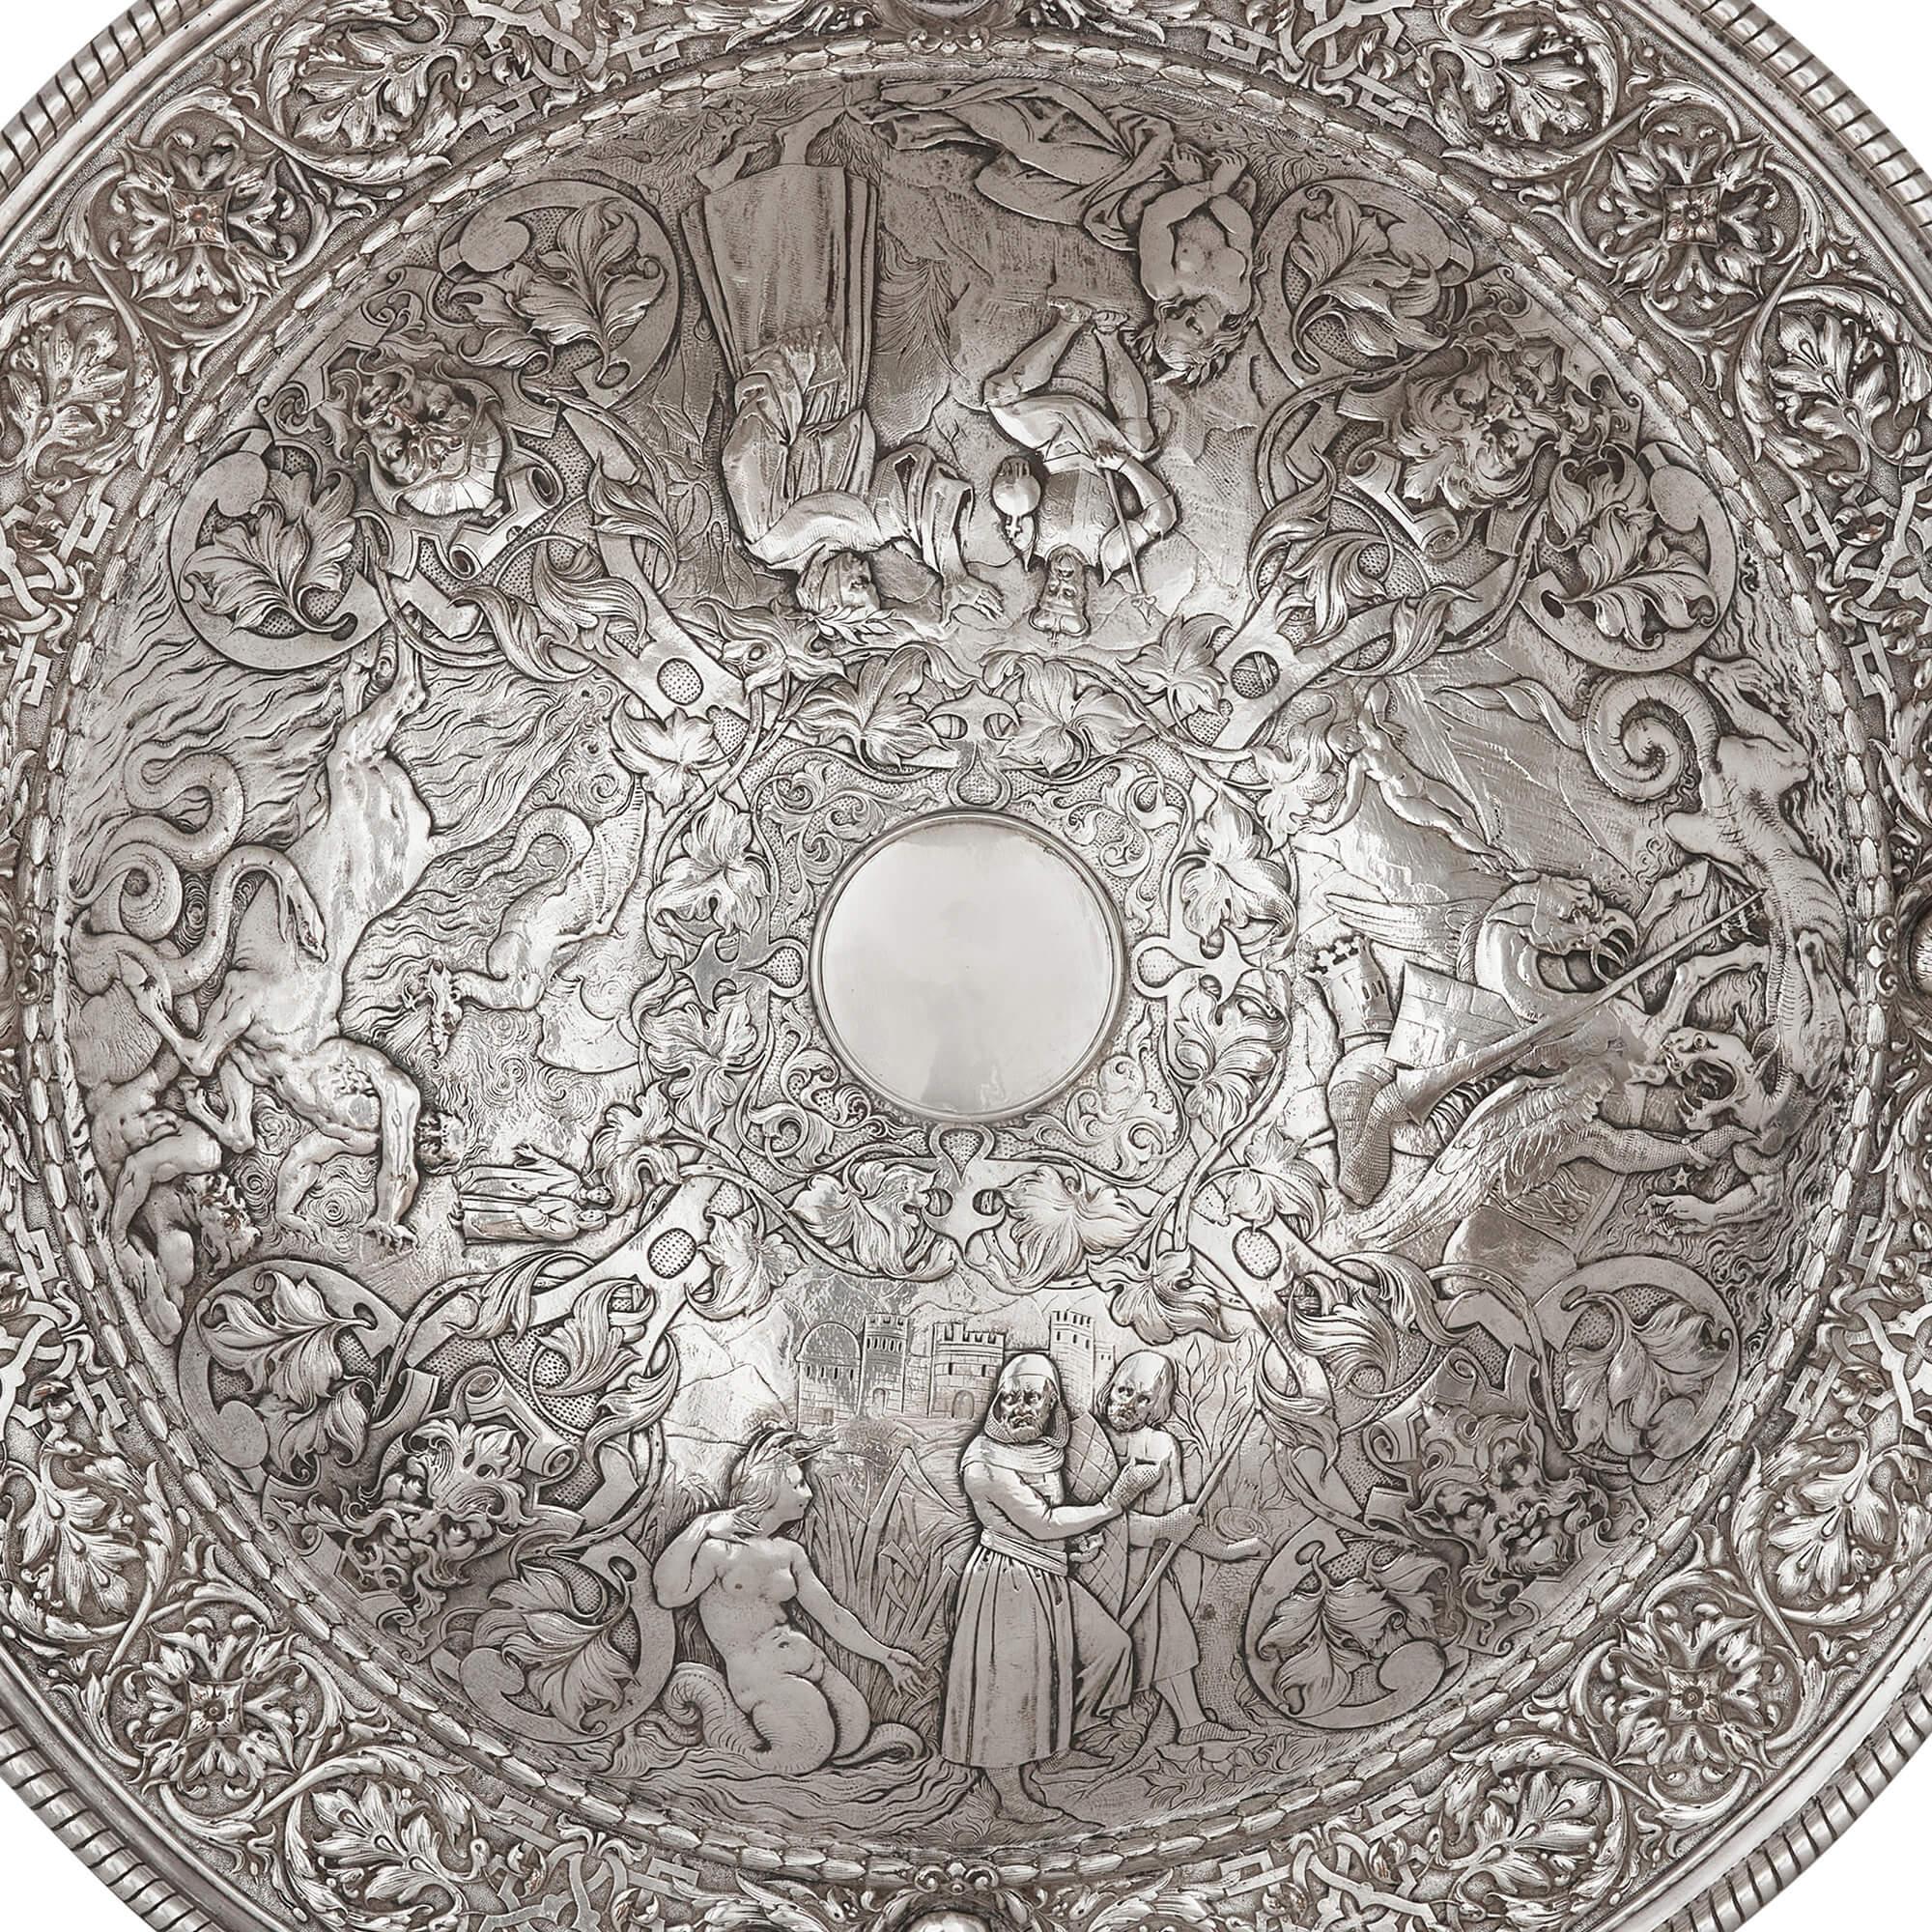 Large silver plated charger with mythological and battle scenes 
English, 19th century 
Height 4cm, diameter 68cm

This silver plated charger depicts scenes of battle between humans and mythical creatures which surround the plain central